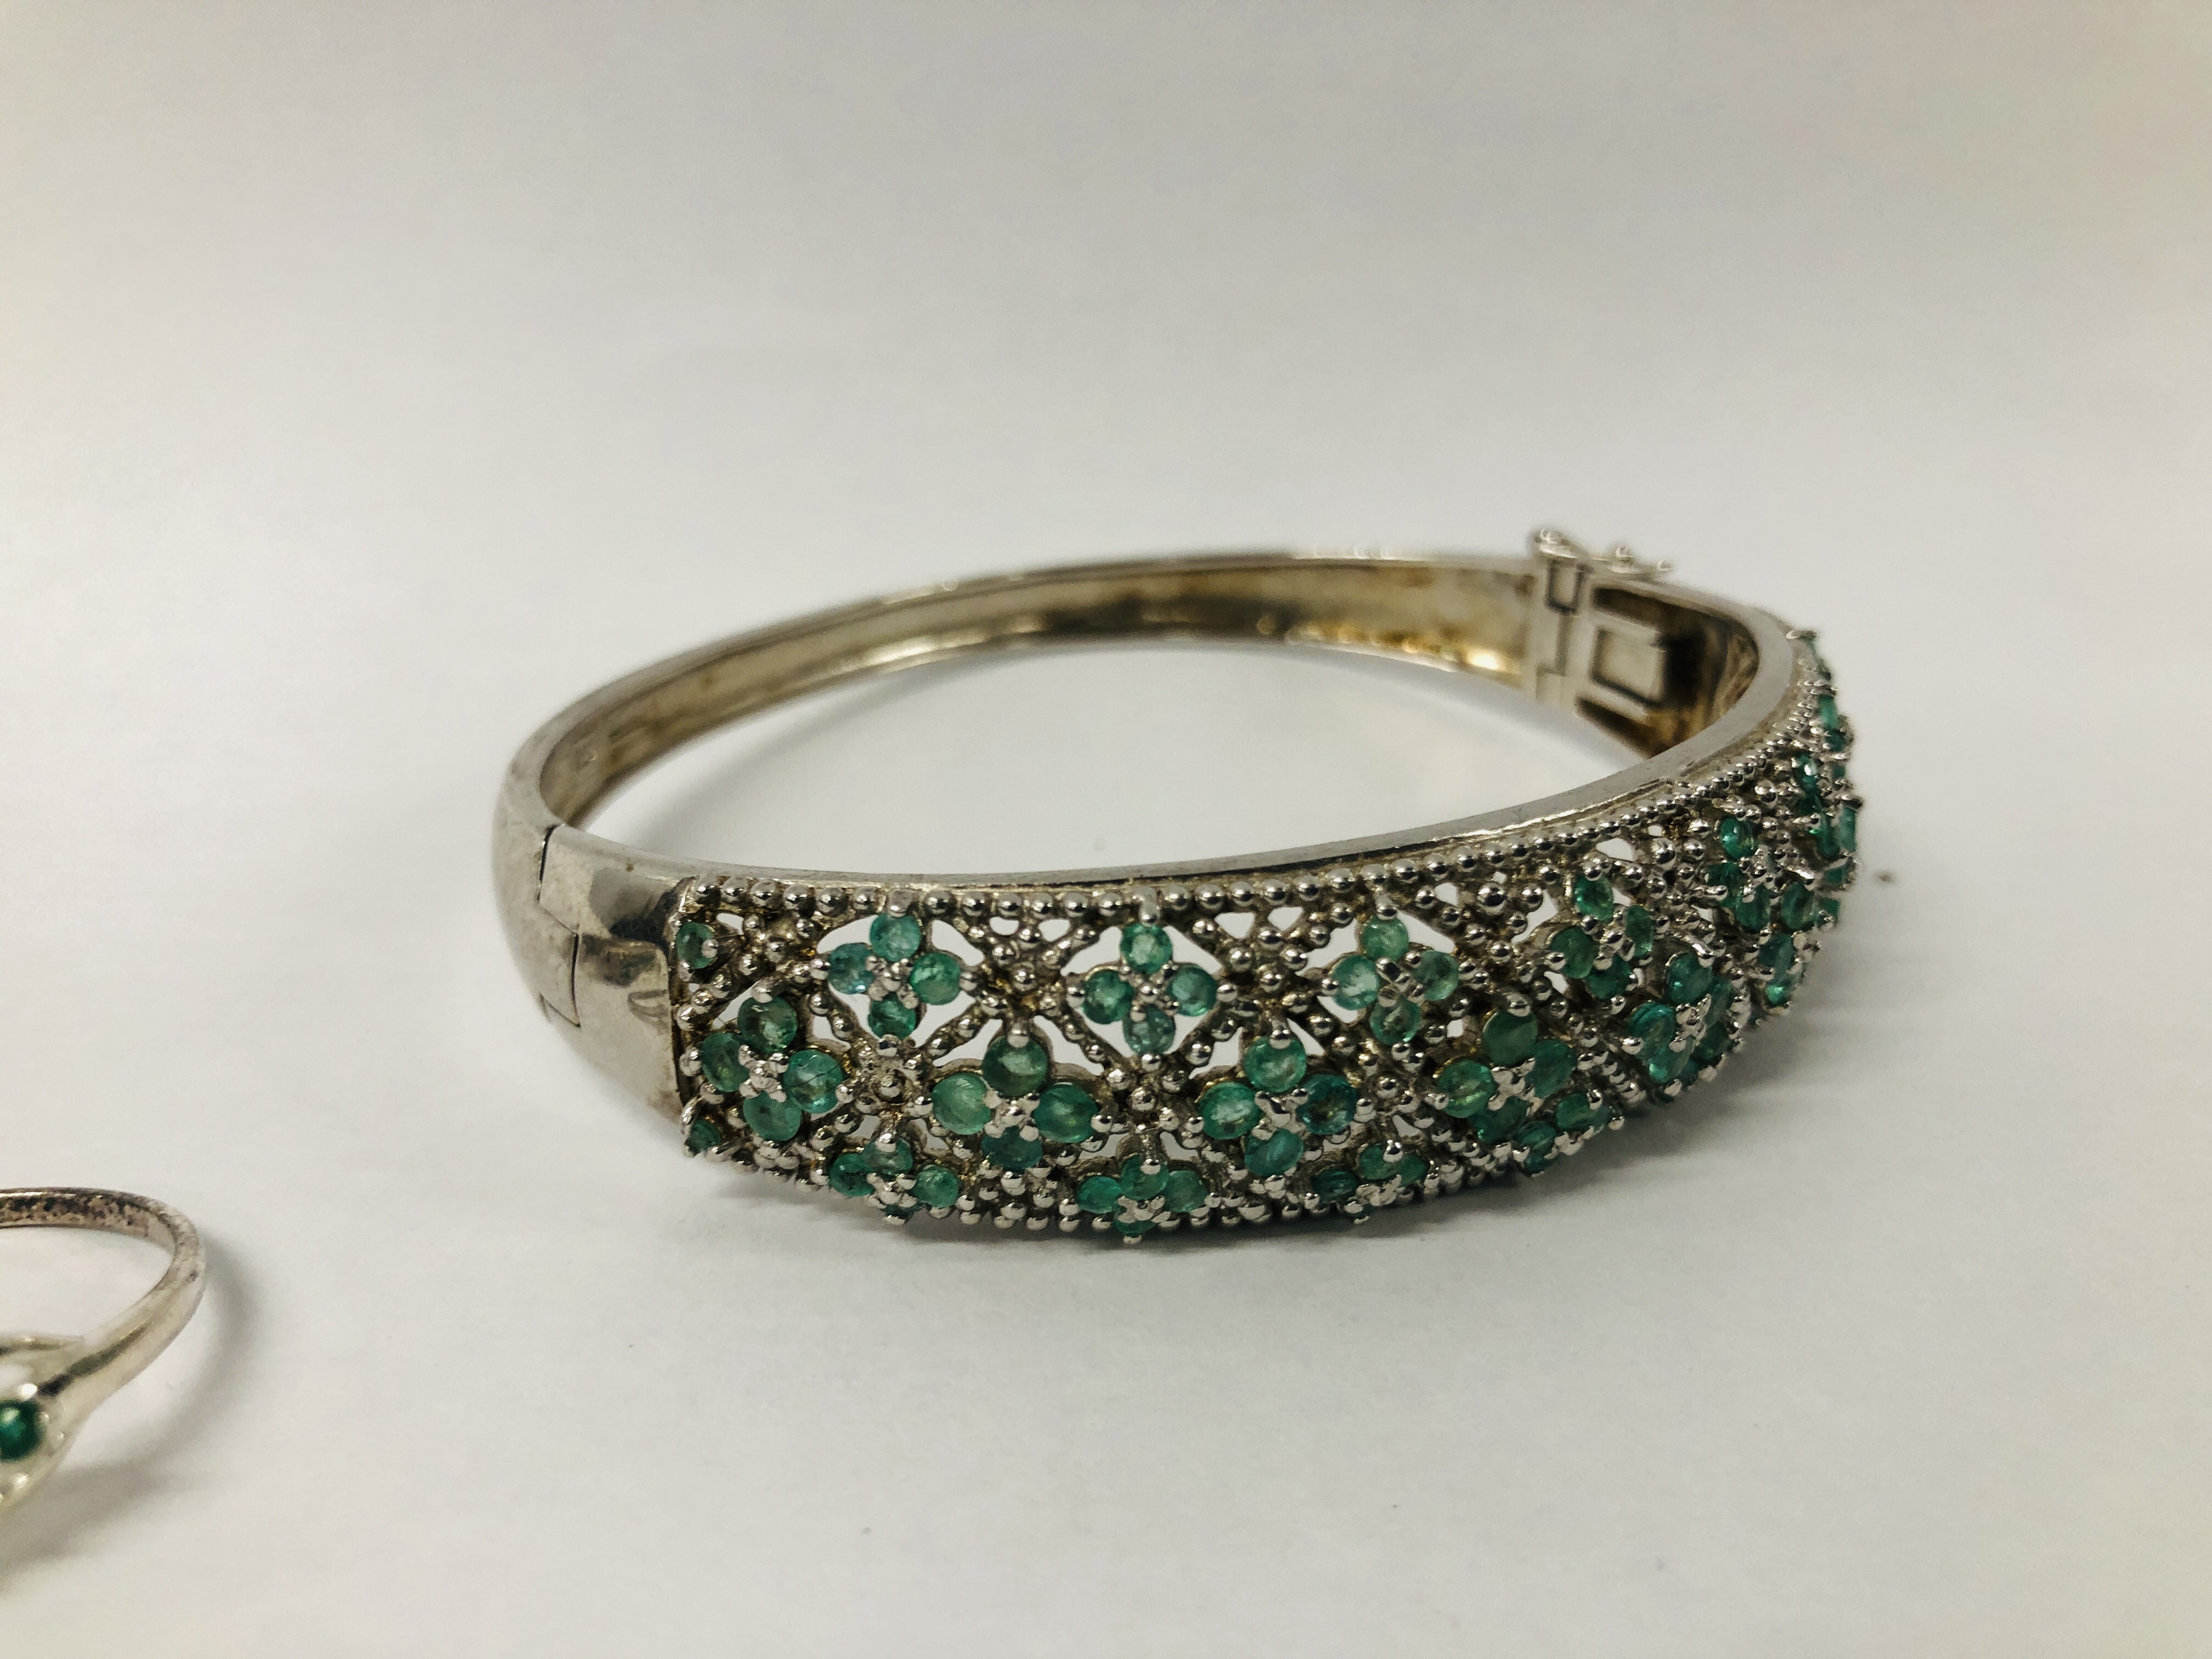 DESIGNER SILVER HINGED BANGLE SET WITH GREEN STONES IN A FLOWER HEAD DESIGN ALONG WITH A PAIR OF - Image 7 of 11